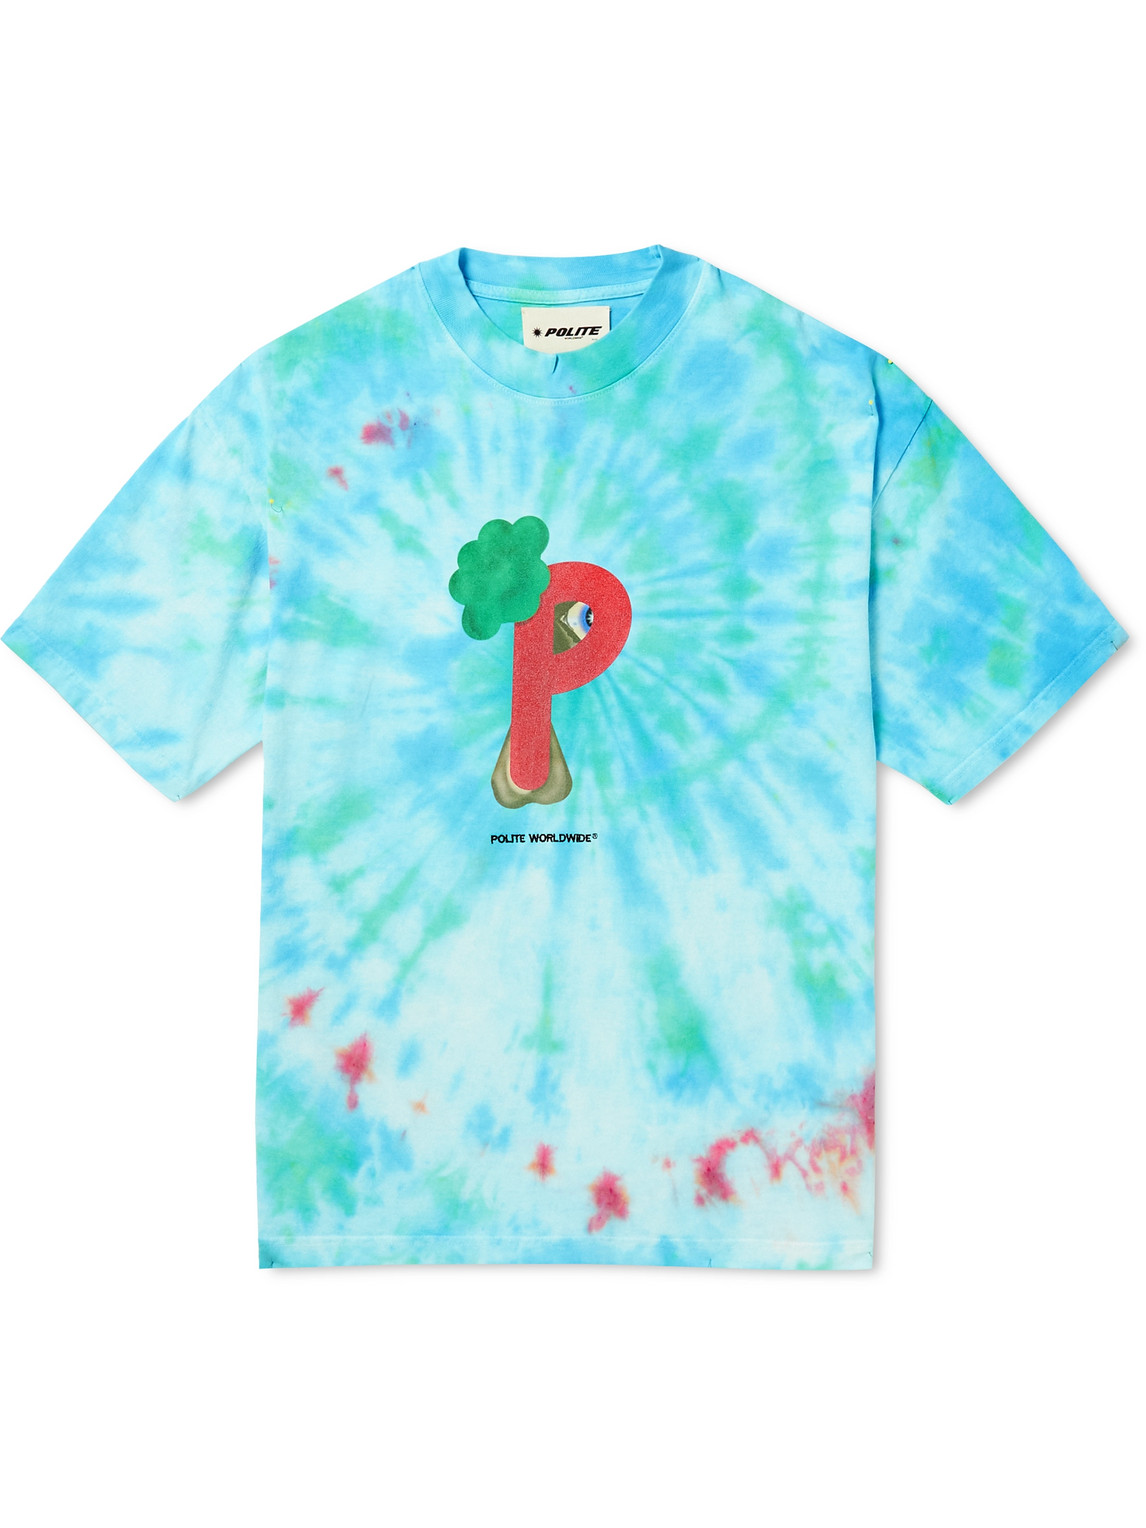 ® Proccoli Printed Tie-Dyed Cotton-Jersey T-Shirt